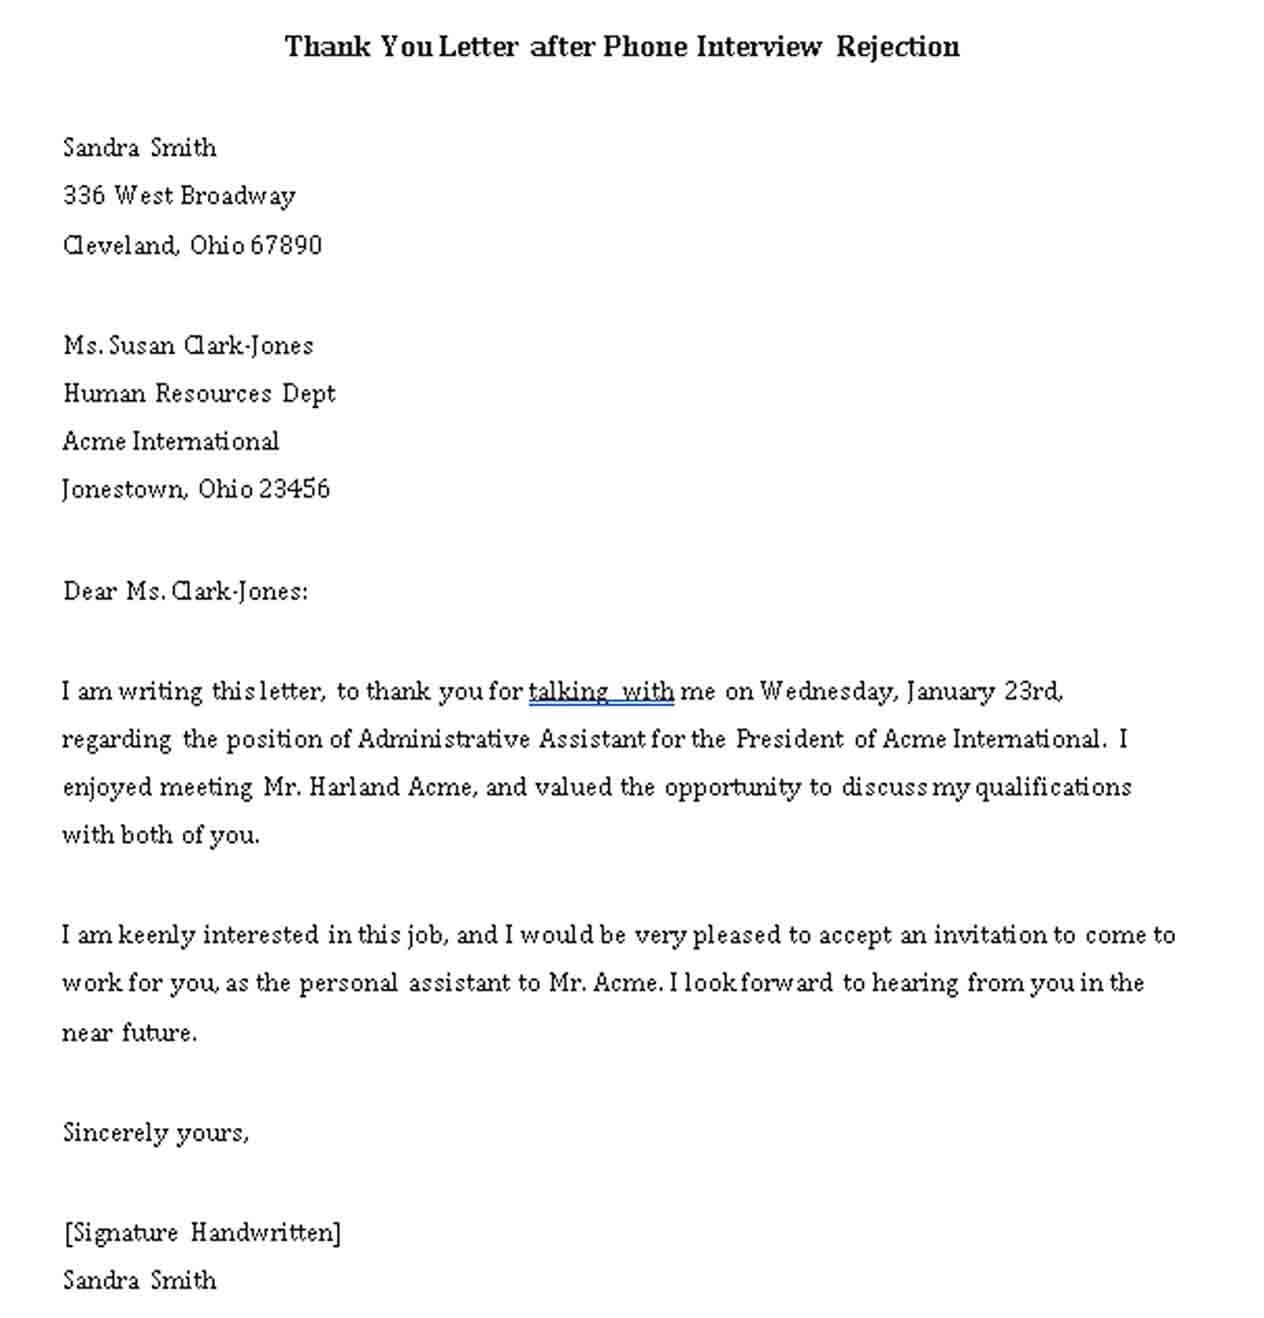 Download Thank You Letter after Phone Interview Rejection